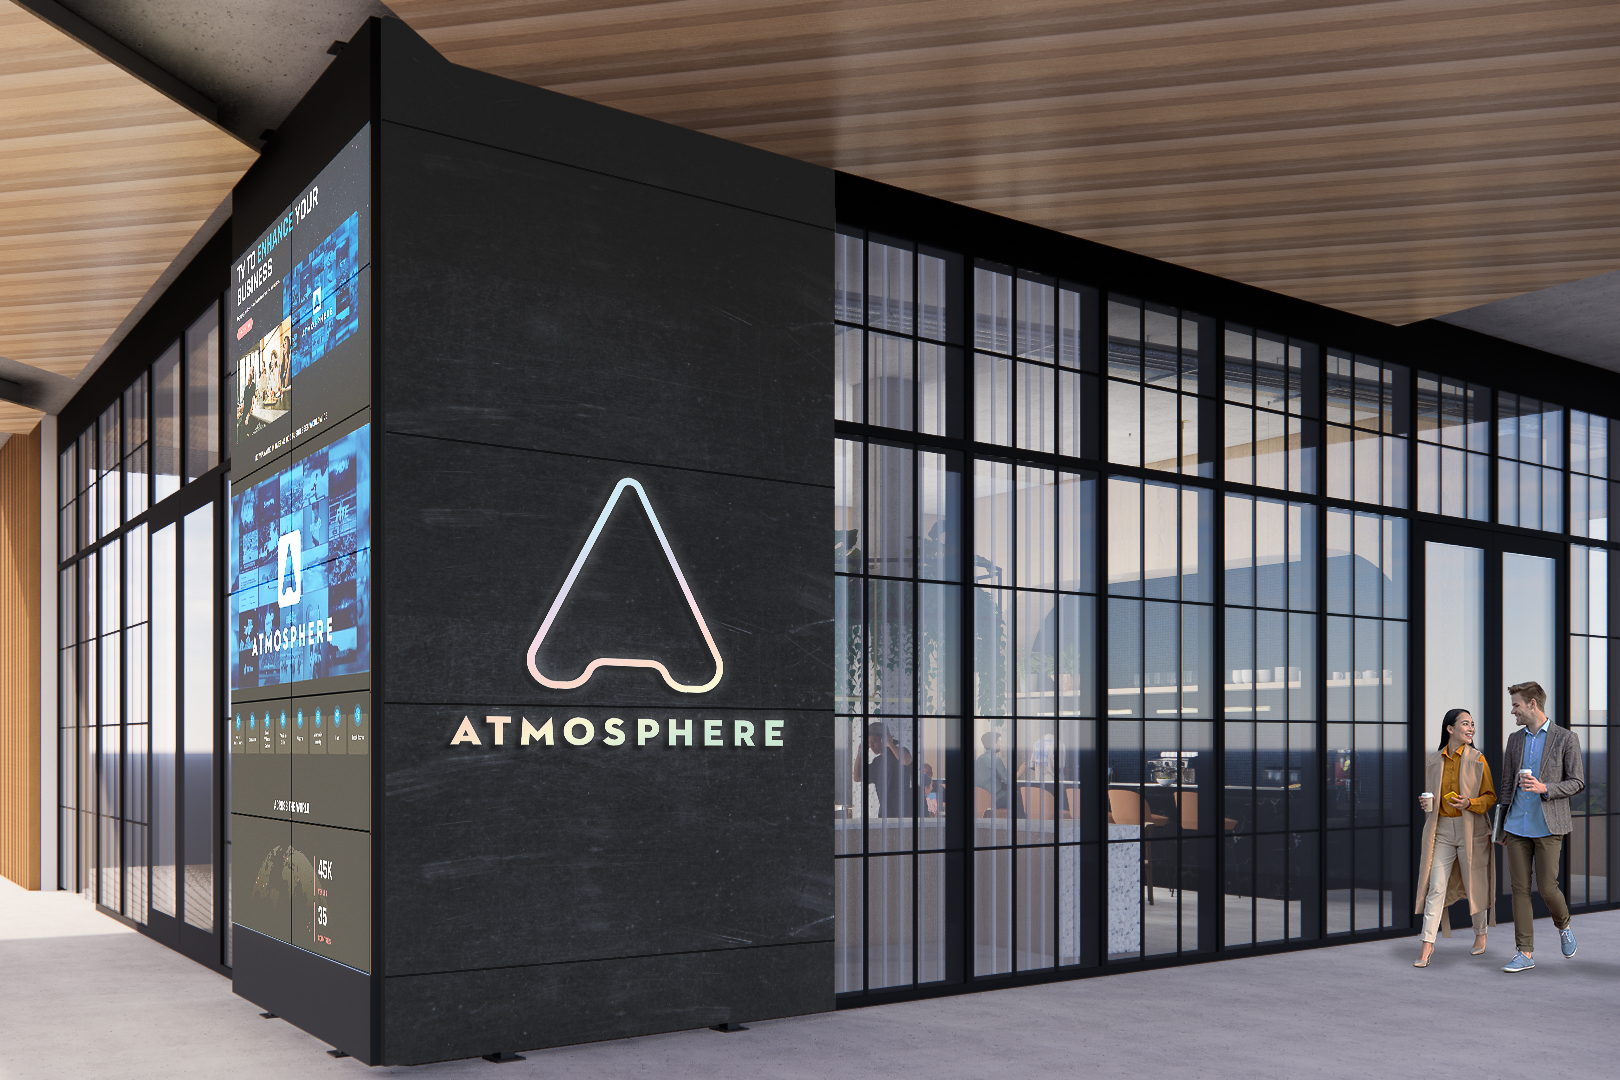 Atmosphere TV | Collaboration with Chioco Design yields brand-centric but intentionally subtle signage aesthetic